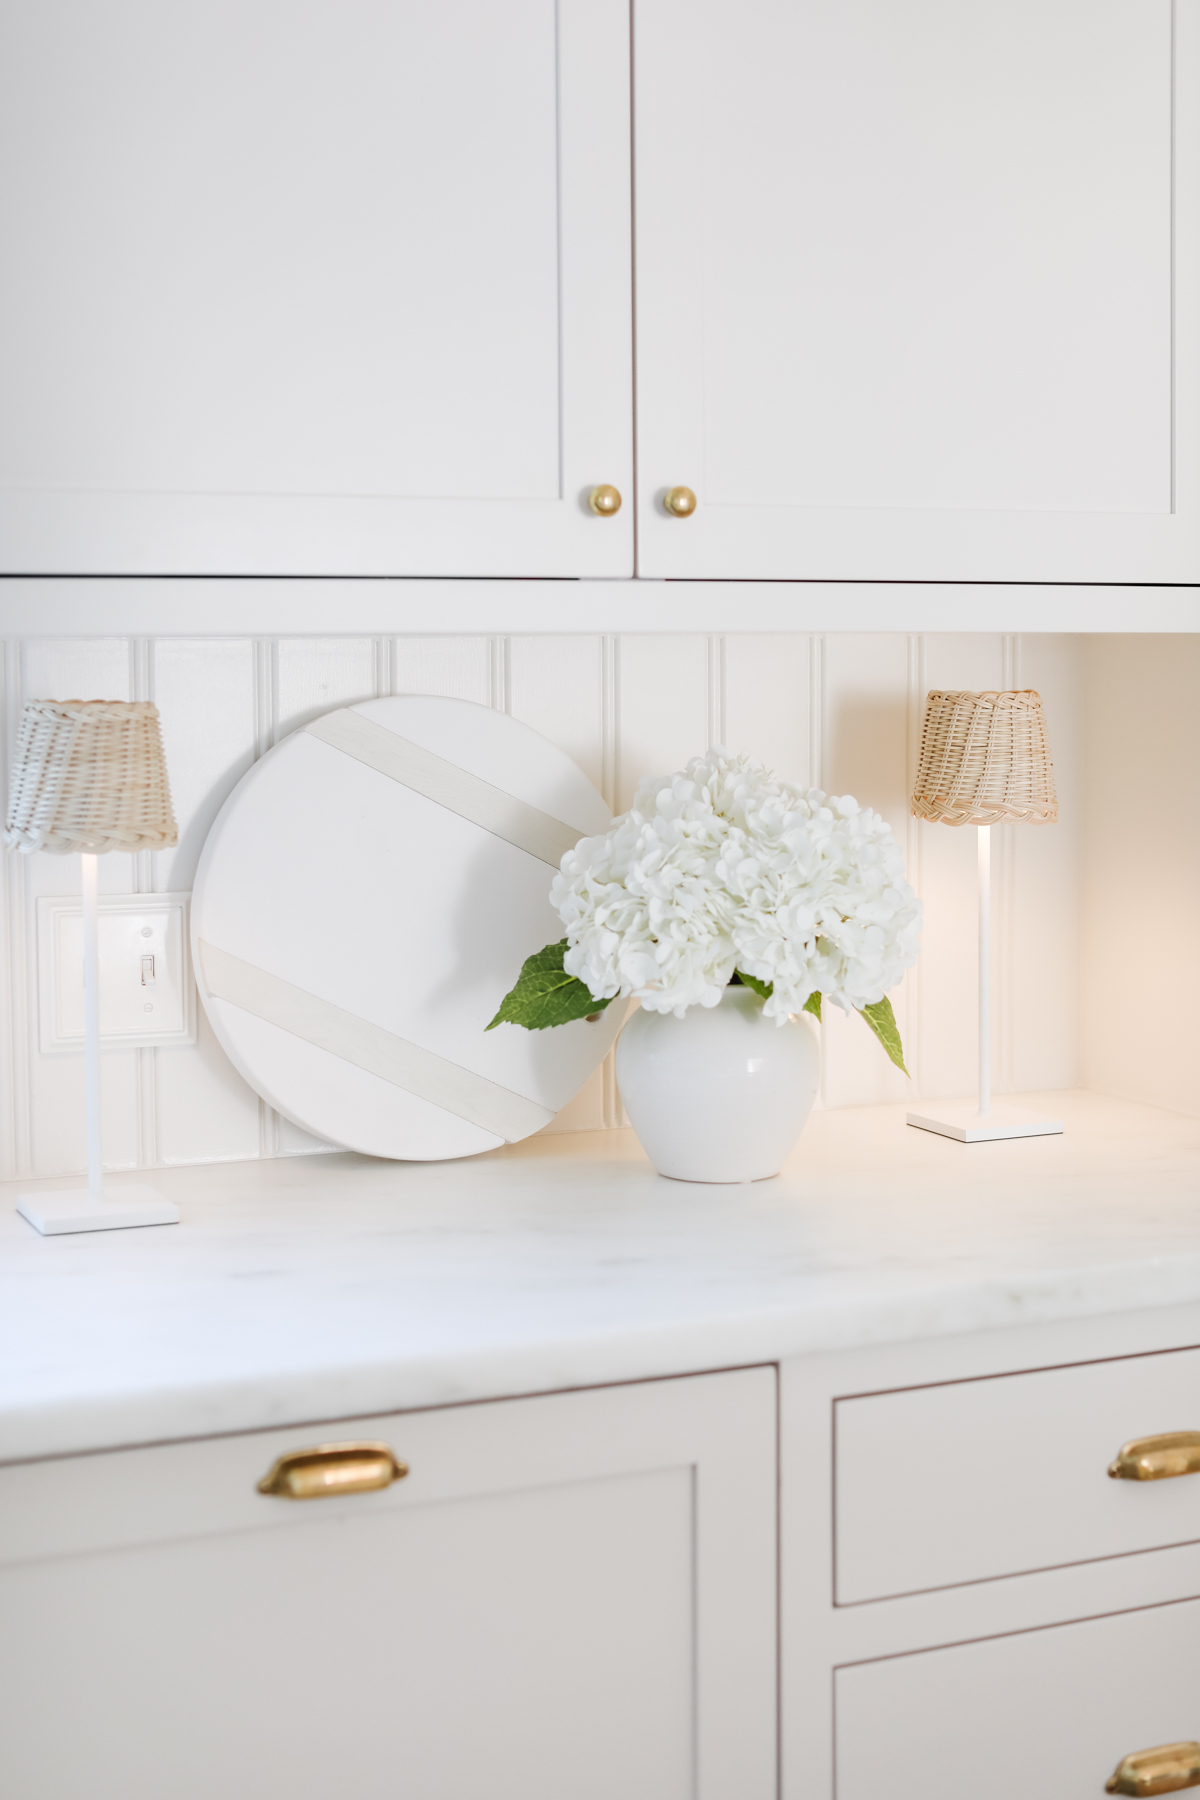 An all-white kitchen featuring cabinets and a vase of flowers.